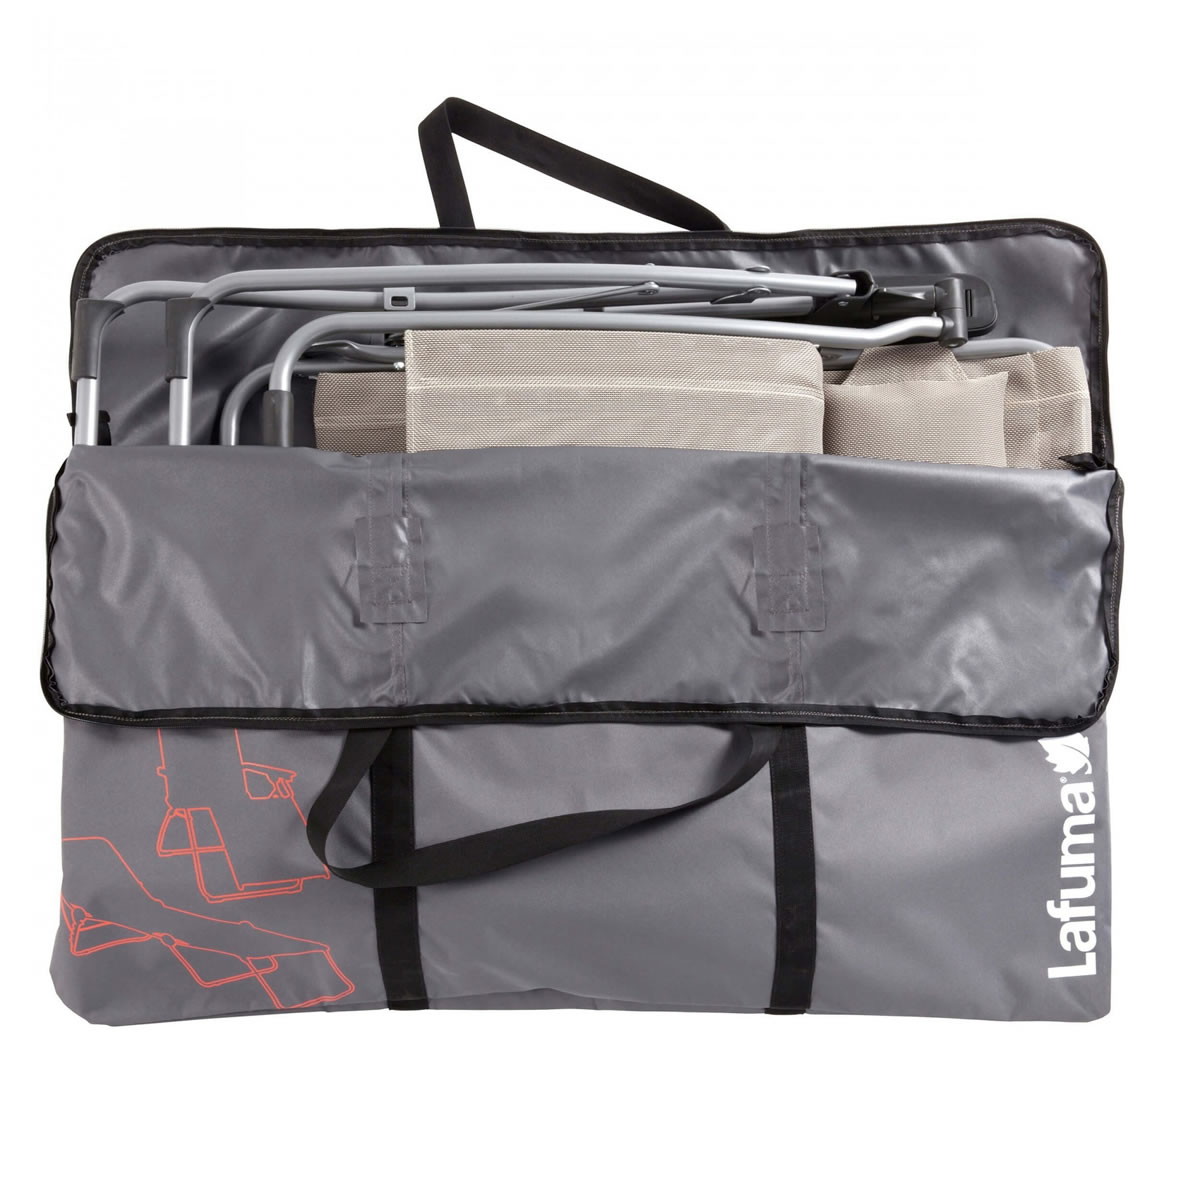 Extra image of Lafuma Carry Bag for Futura, R Clip, Rsx, Rsxa Recliners in Anthracite